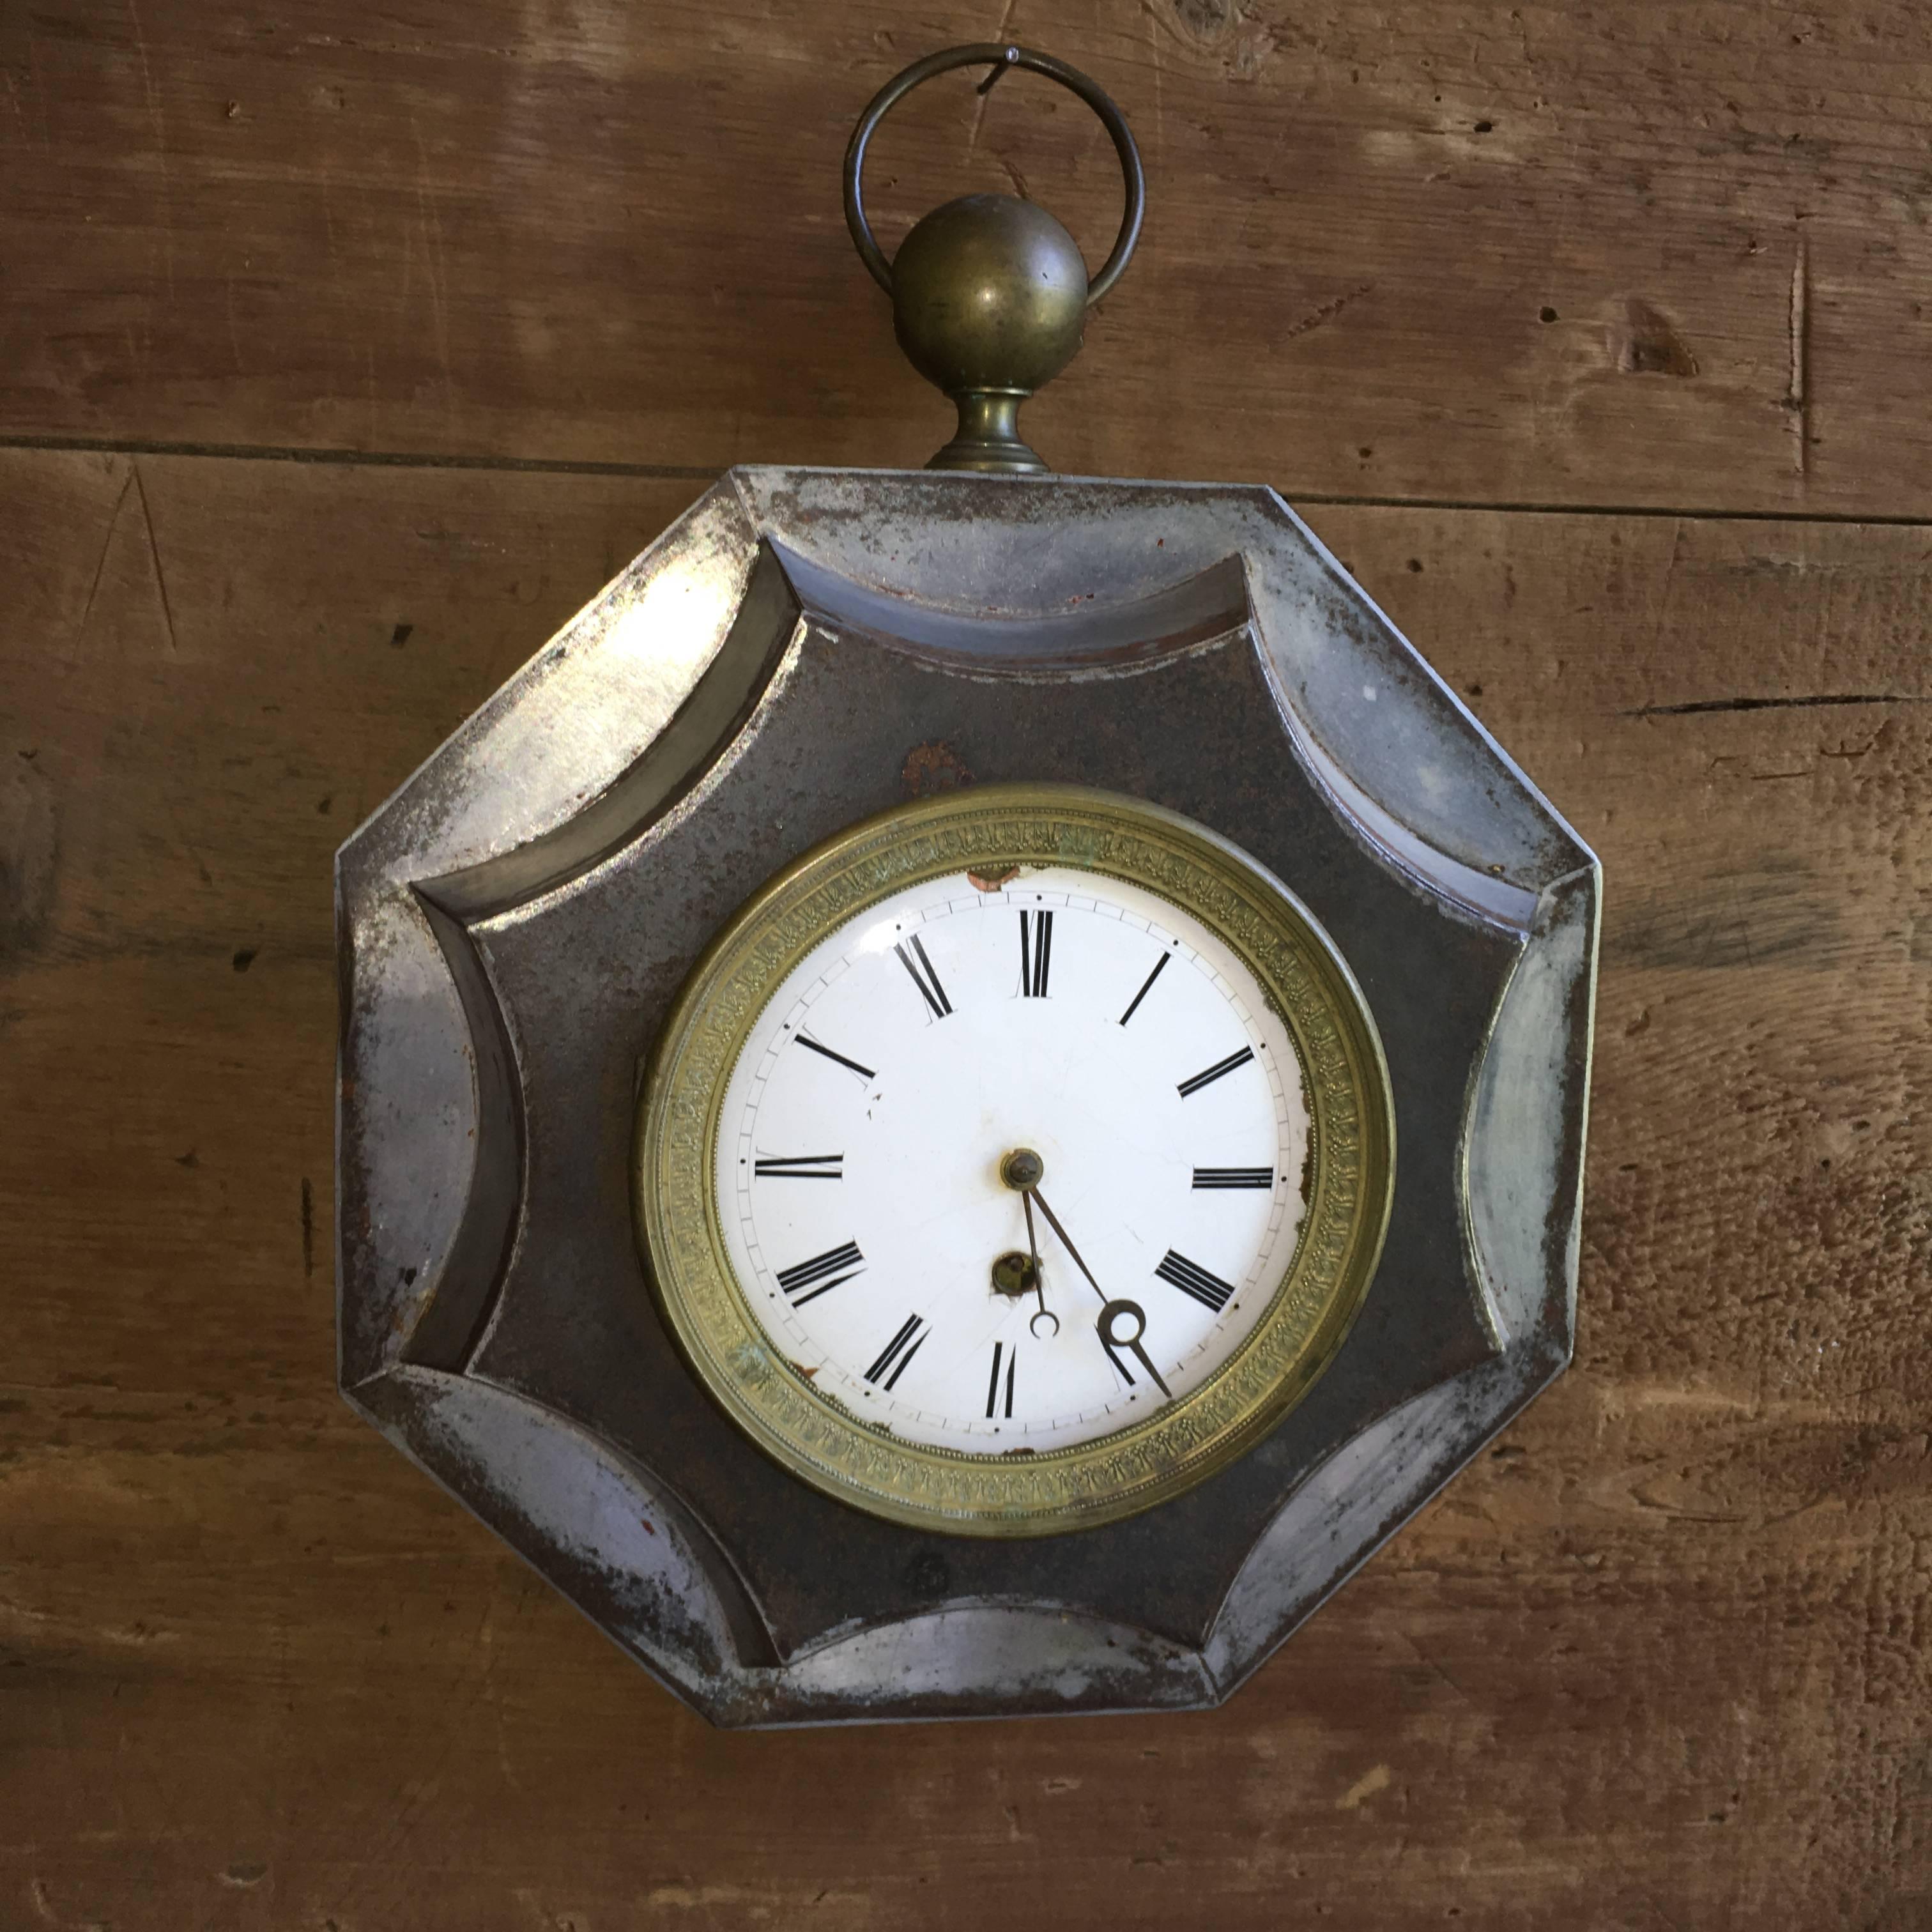 A decorative French Empire period wall clock in tole with brass details and porcelain face, circa 1810.